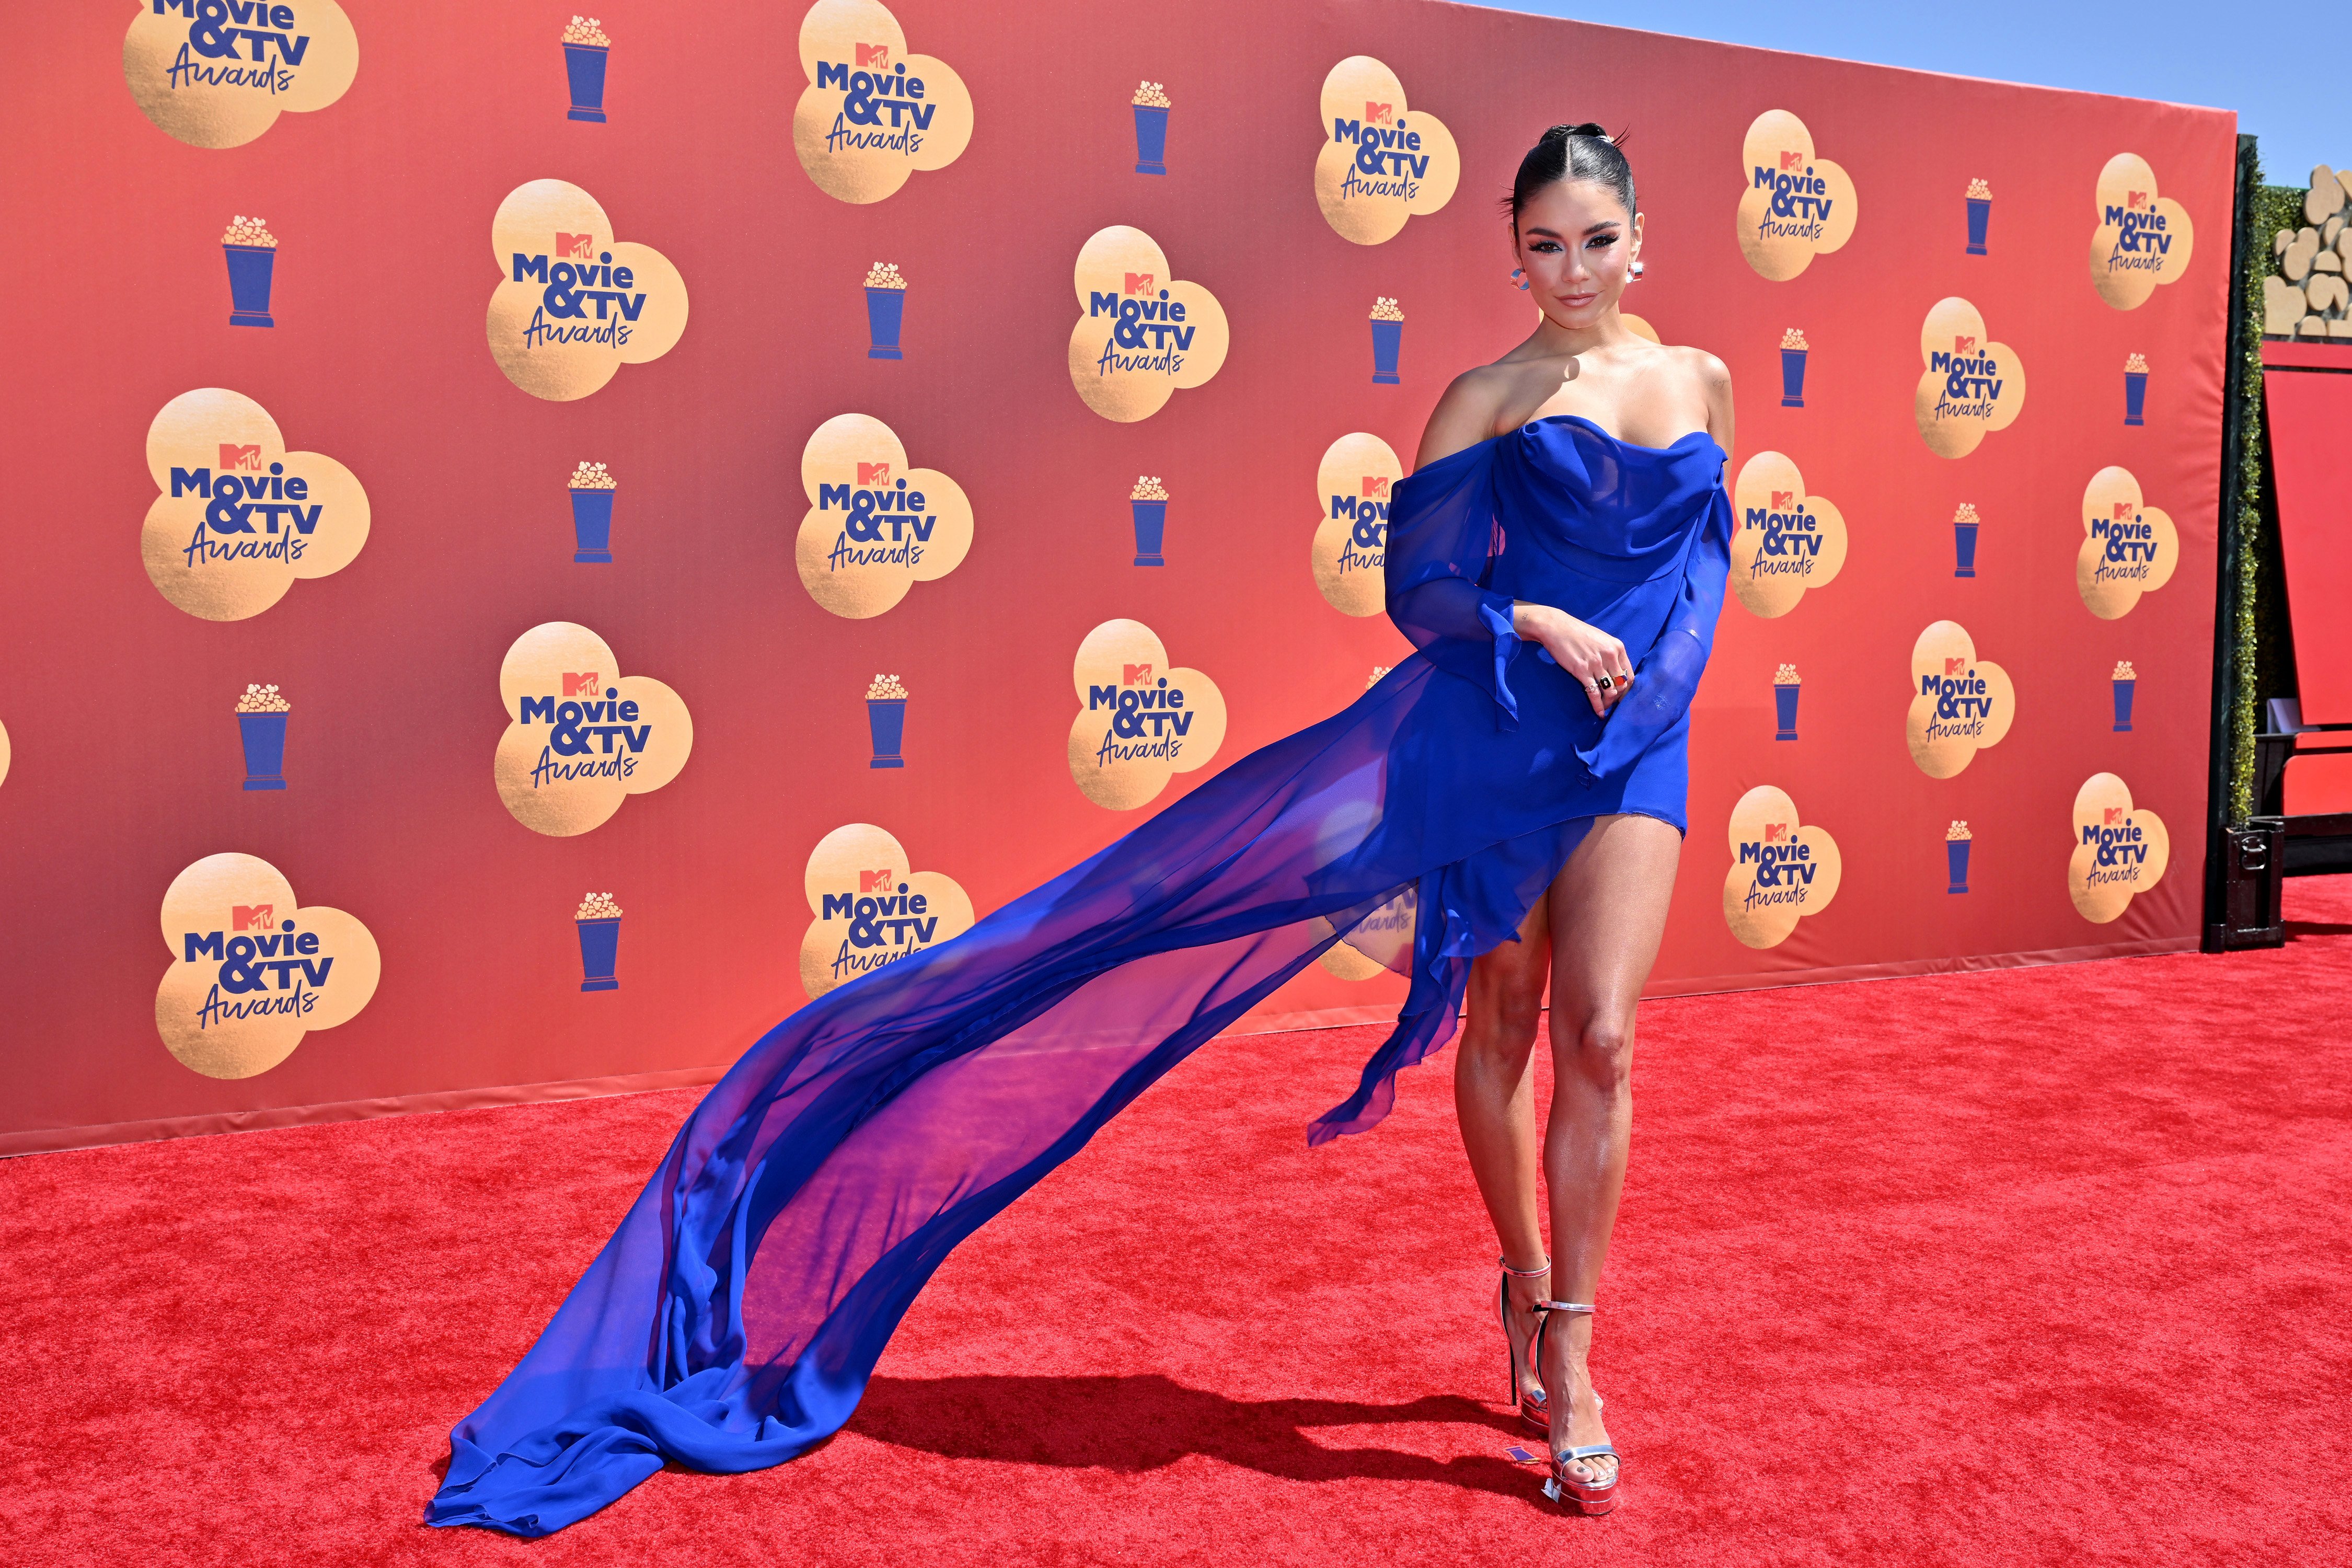 Vanessa Hudgens on the red carpet at the 2022 MTV Movie & TV Awards on June 5, 2022 | Source: Getty Images